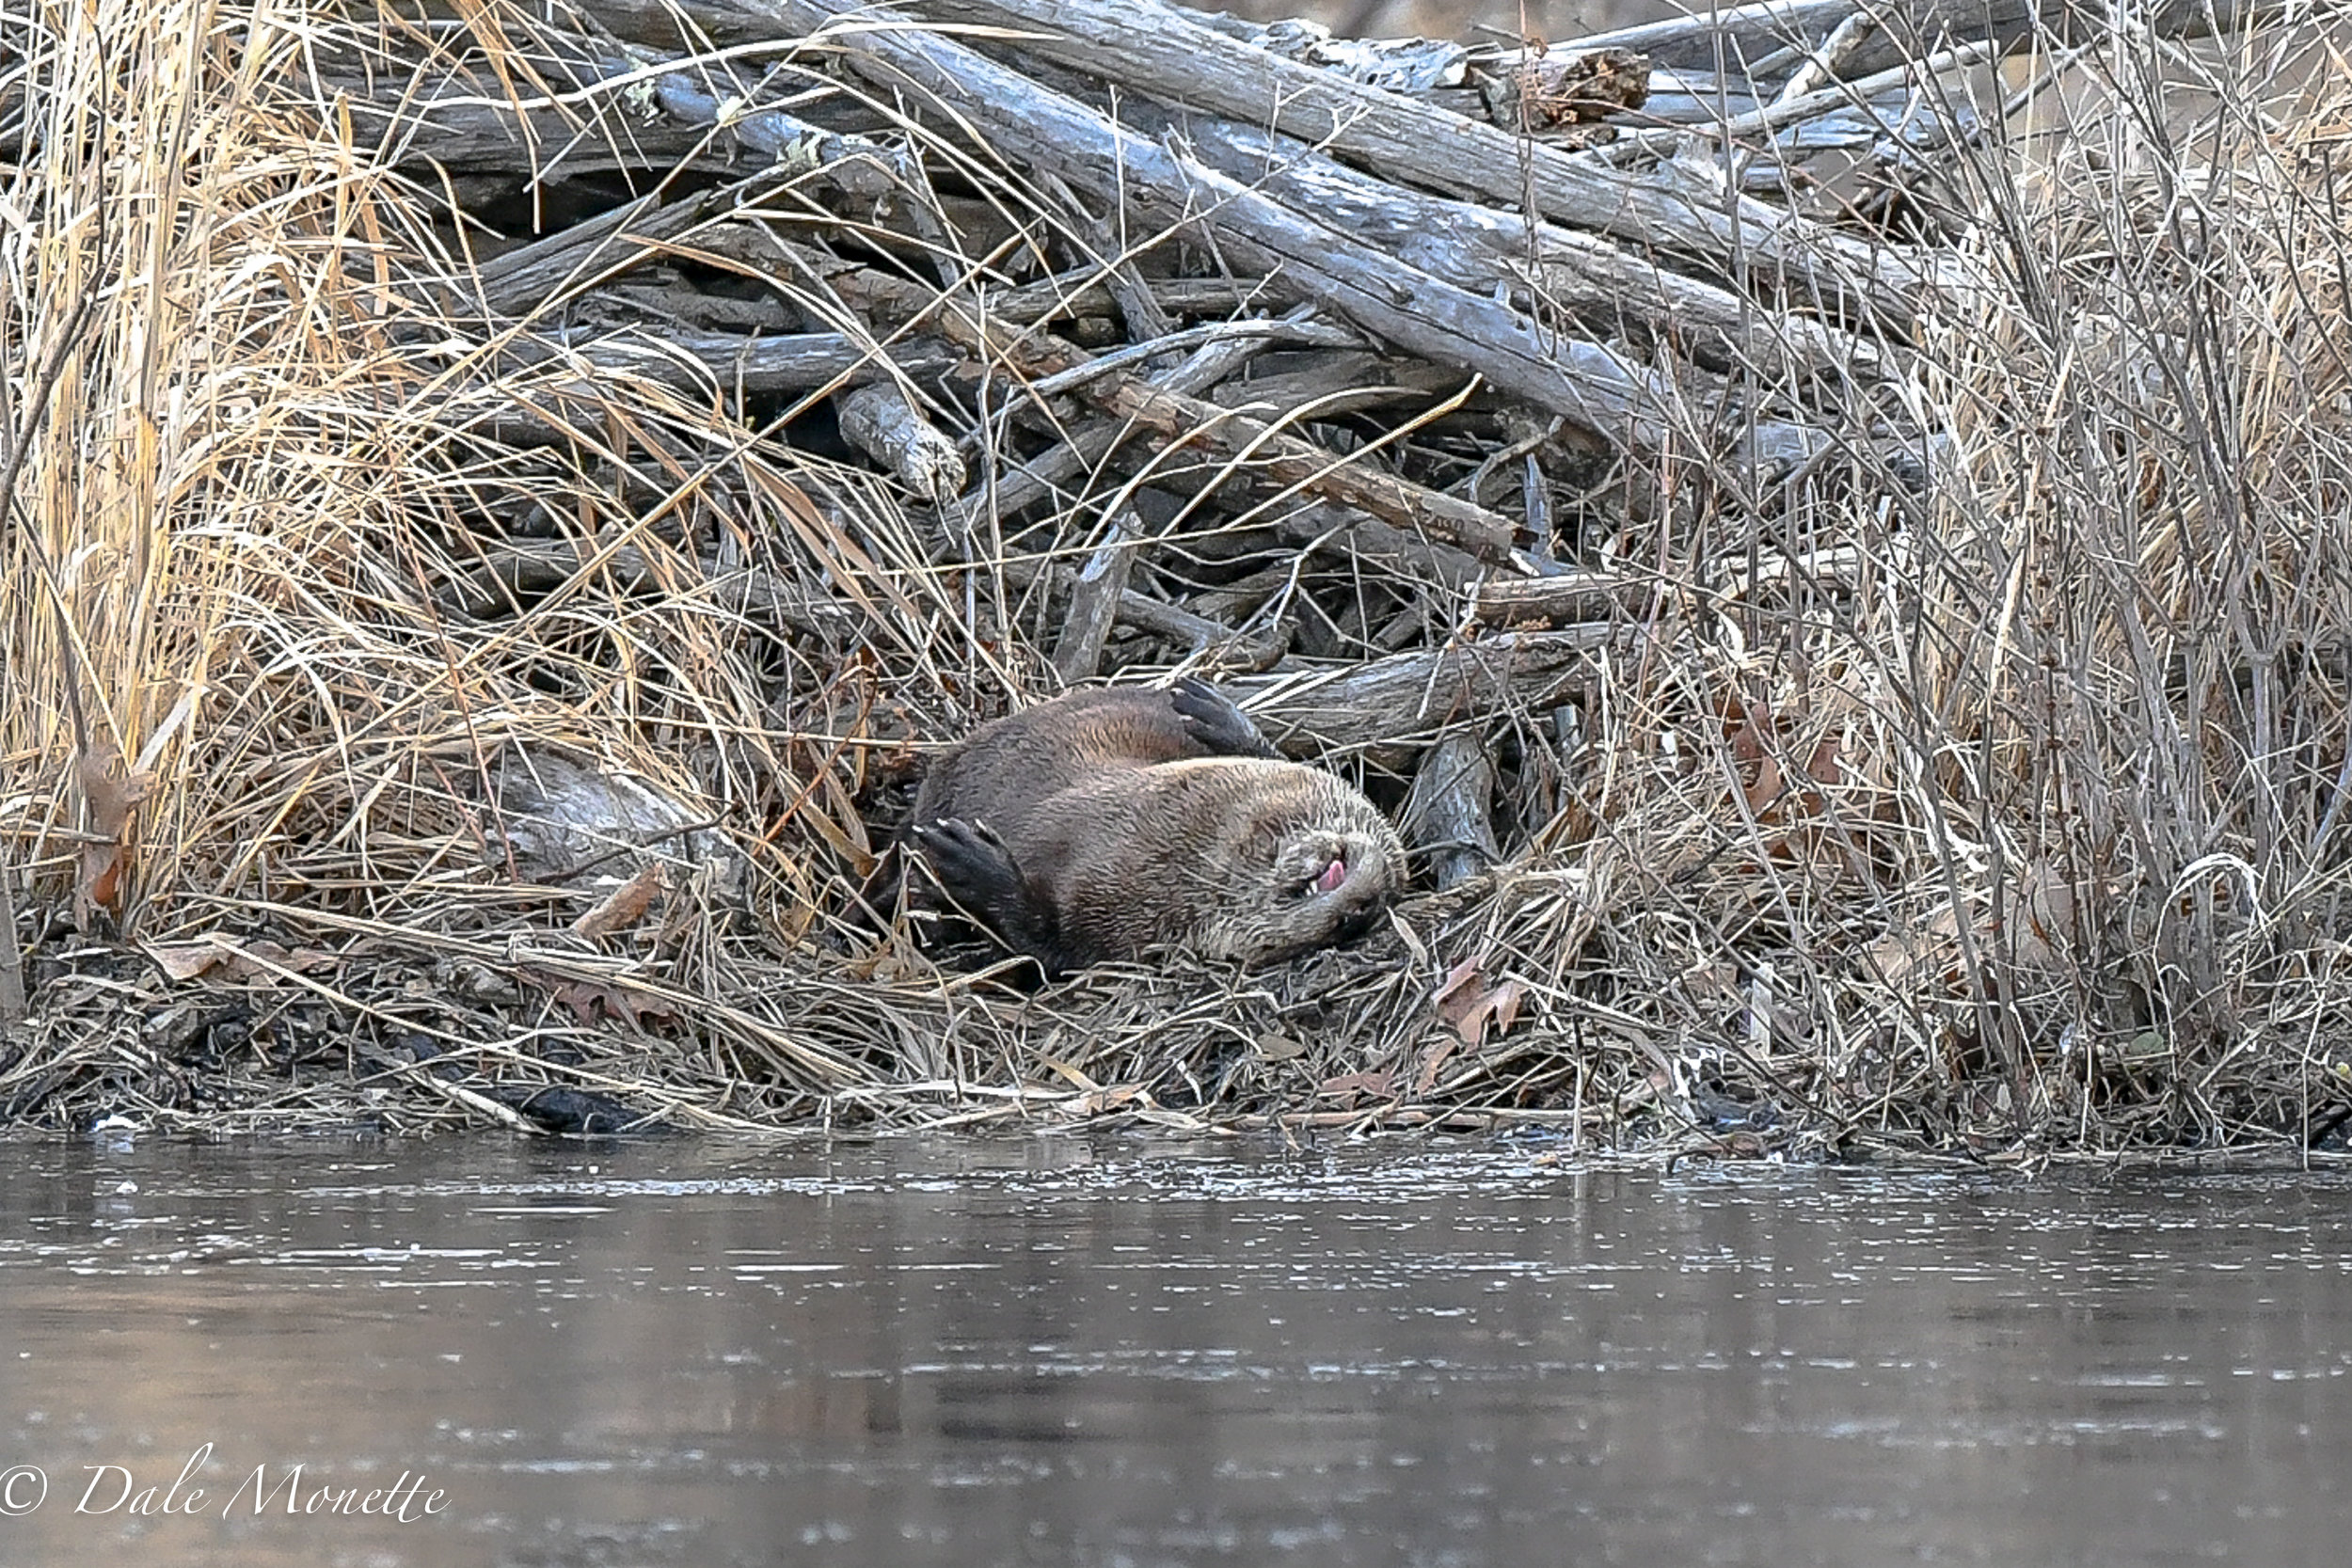   Nothing like a good roll in the dry grass and warn sun!&nbsp; This is the same otter as in the next picture about 2 weeks later. I had fun watching this guy for about 90 minutes or more fish and groom.... 4/6/18  